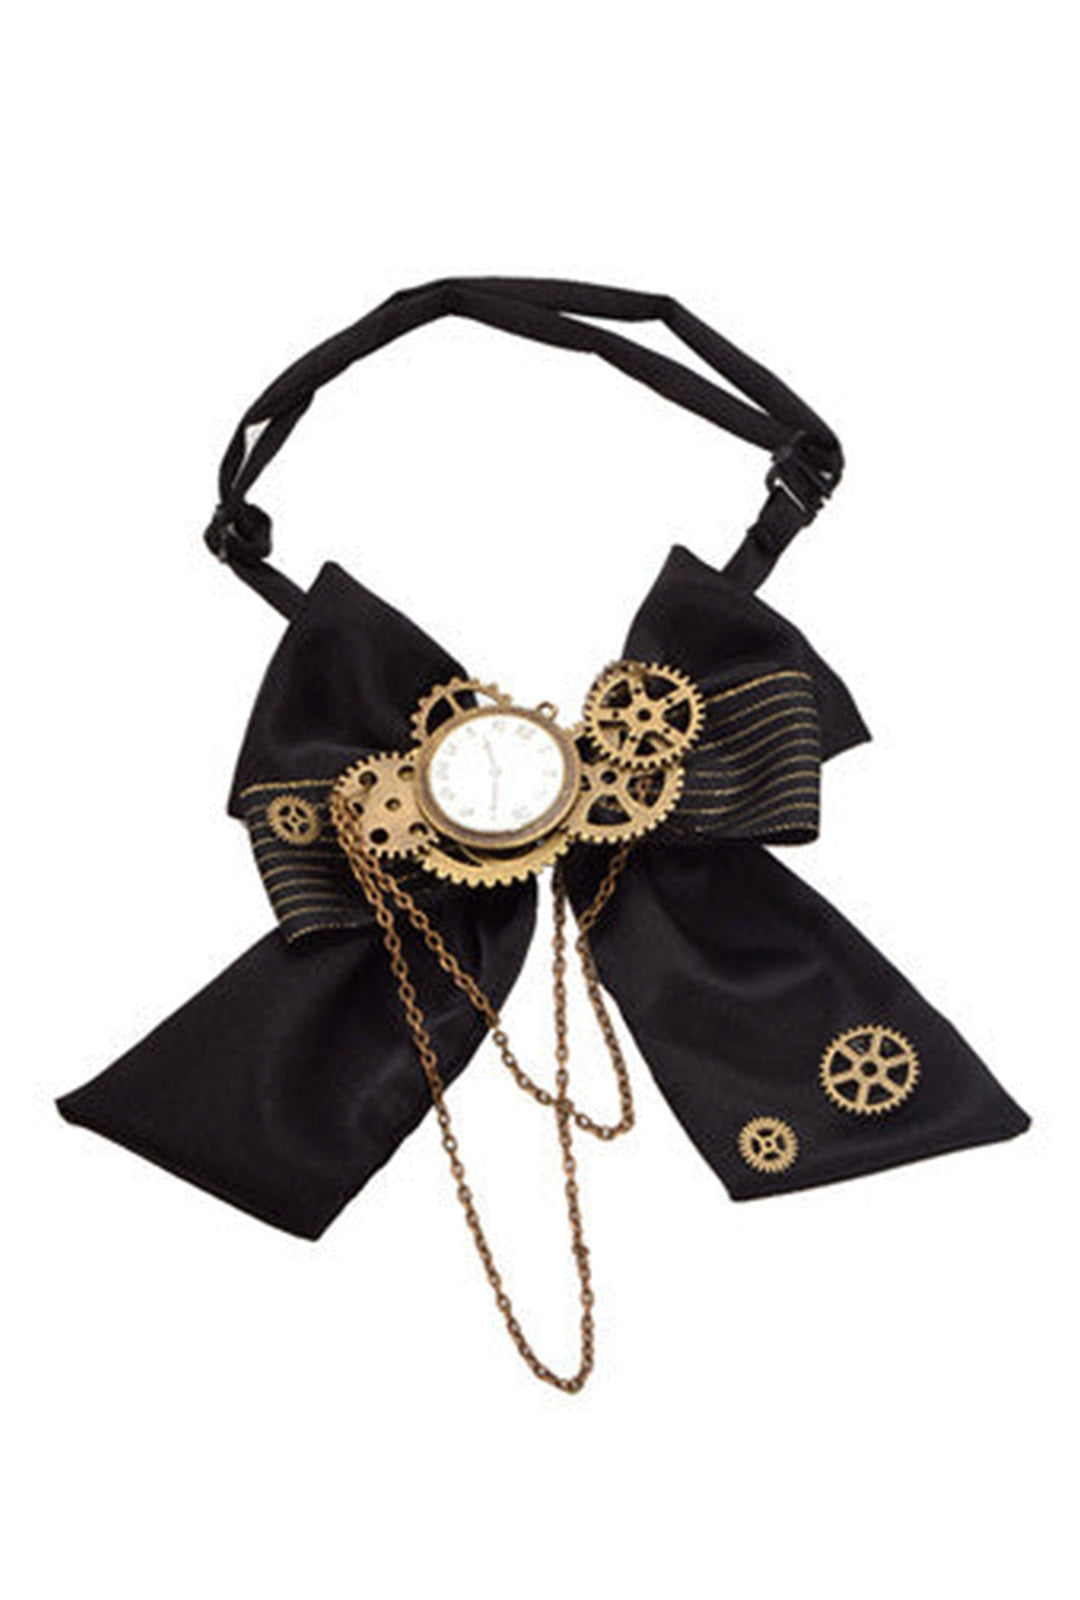 Steampunk Cogs and Clocks Bowtie (G)